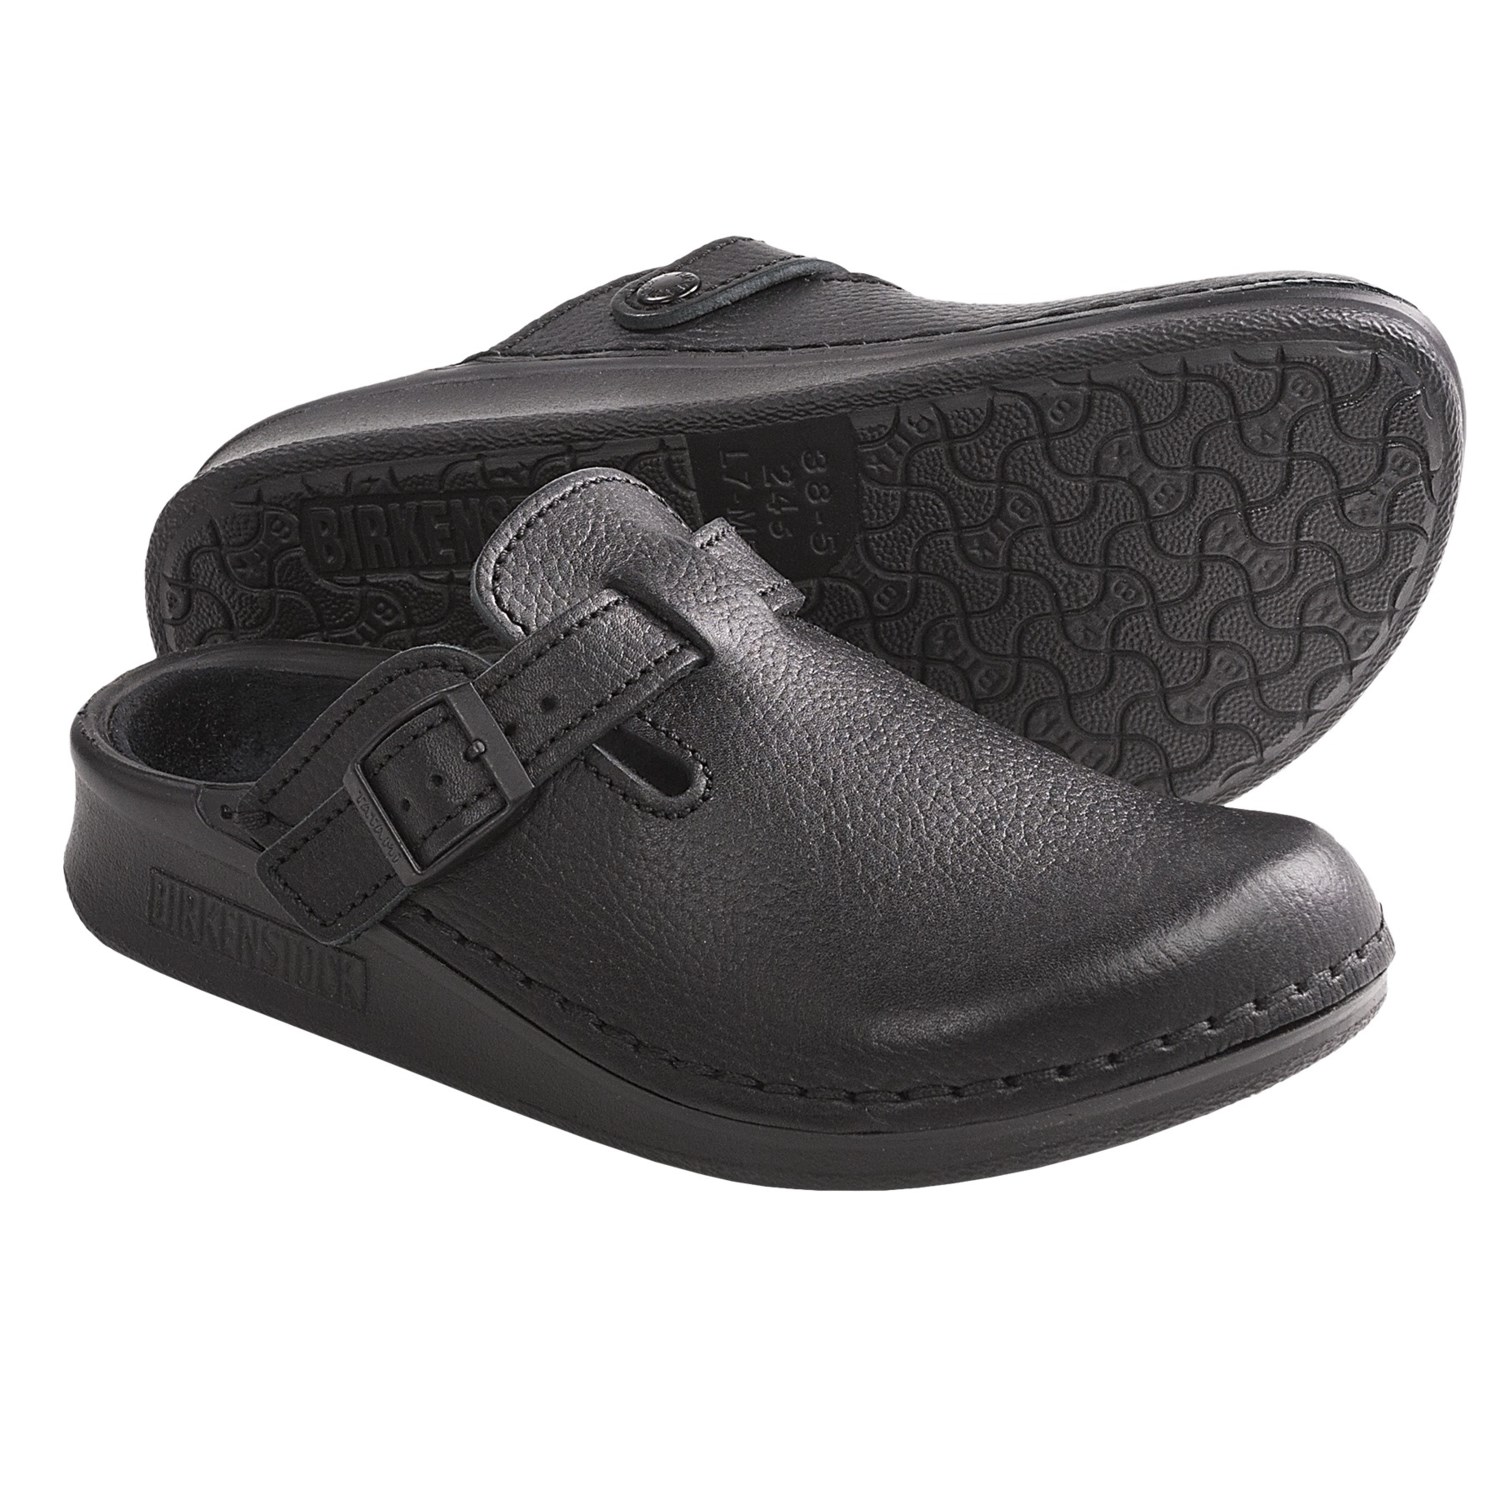 Tatami by Birkenstock Oklahoma Clogs - Leather, Slip-Ons (For Men and ...